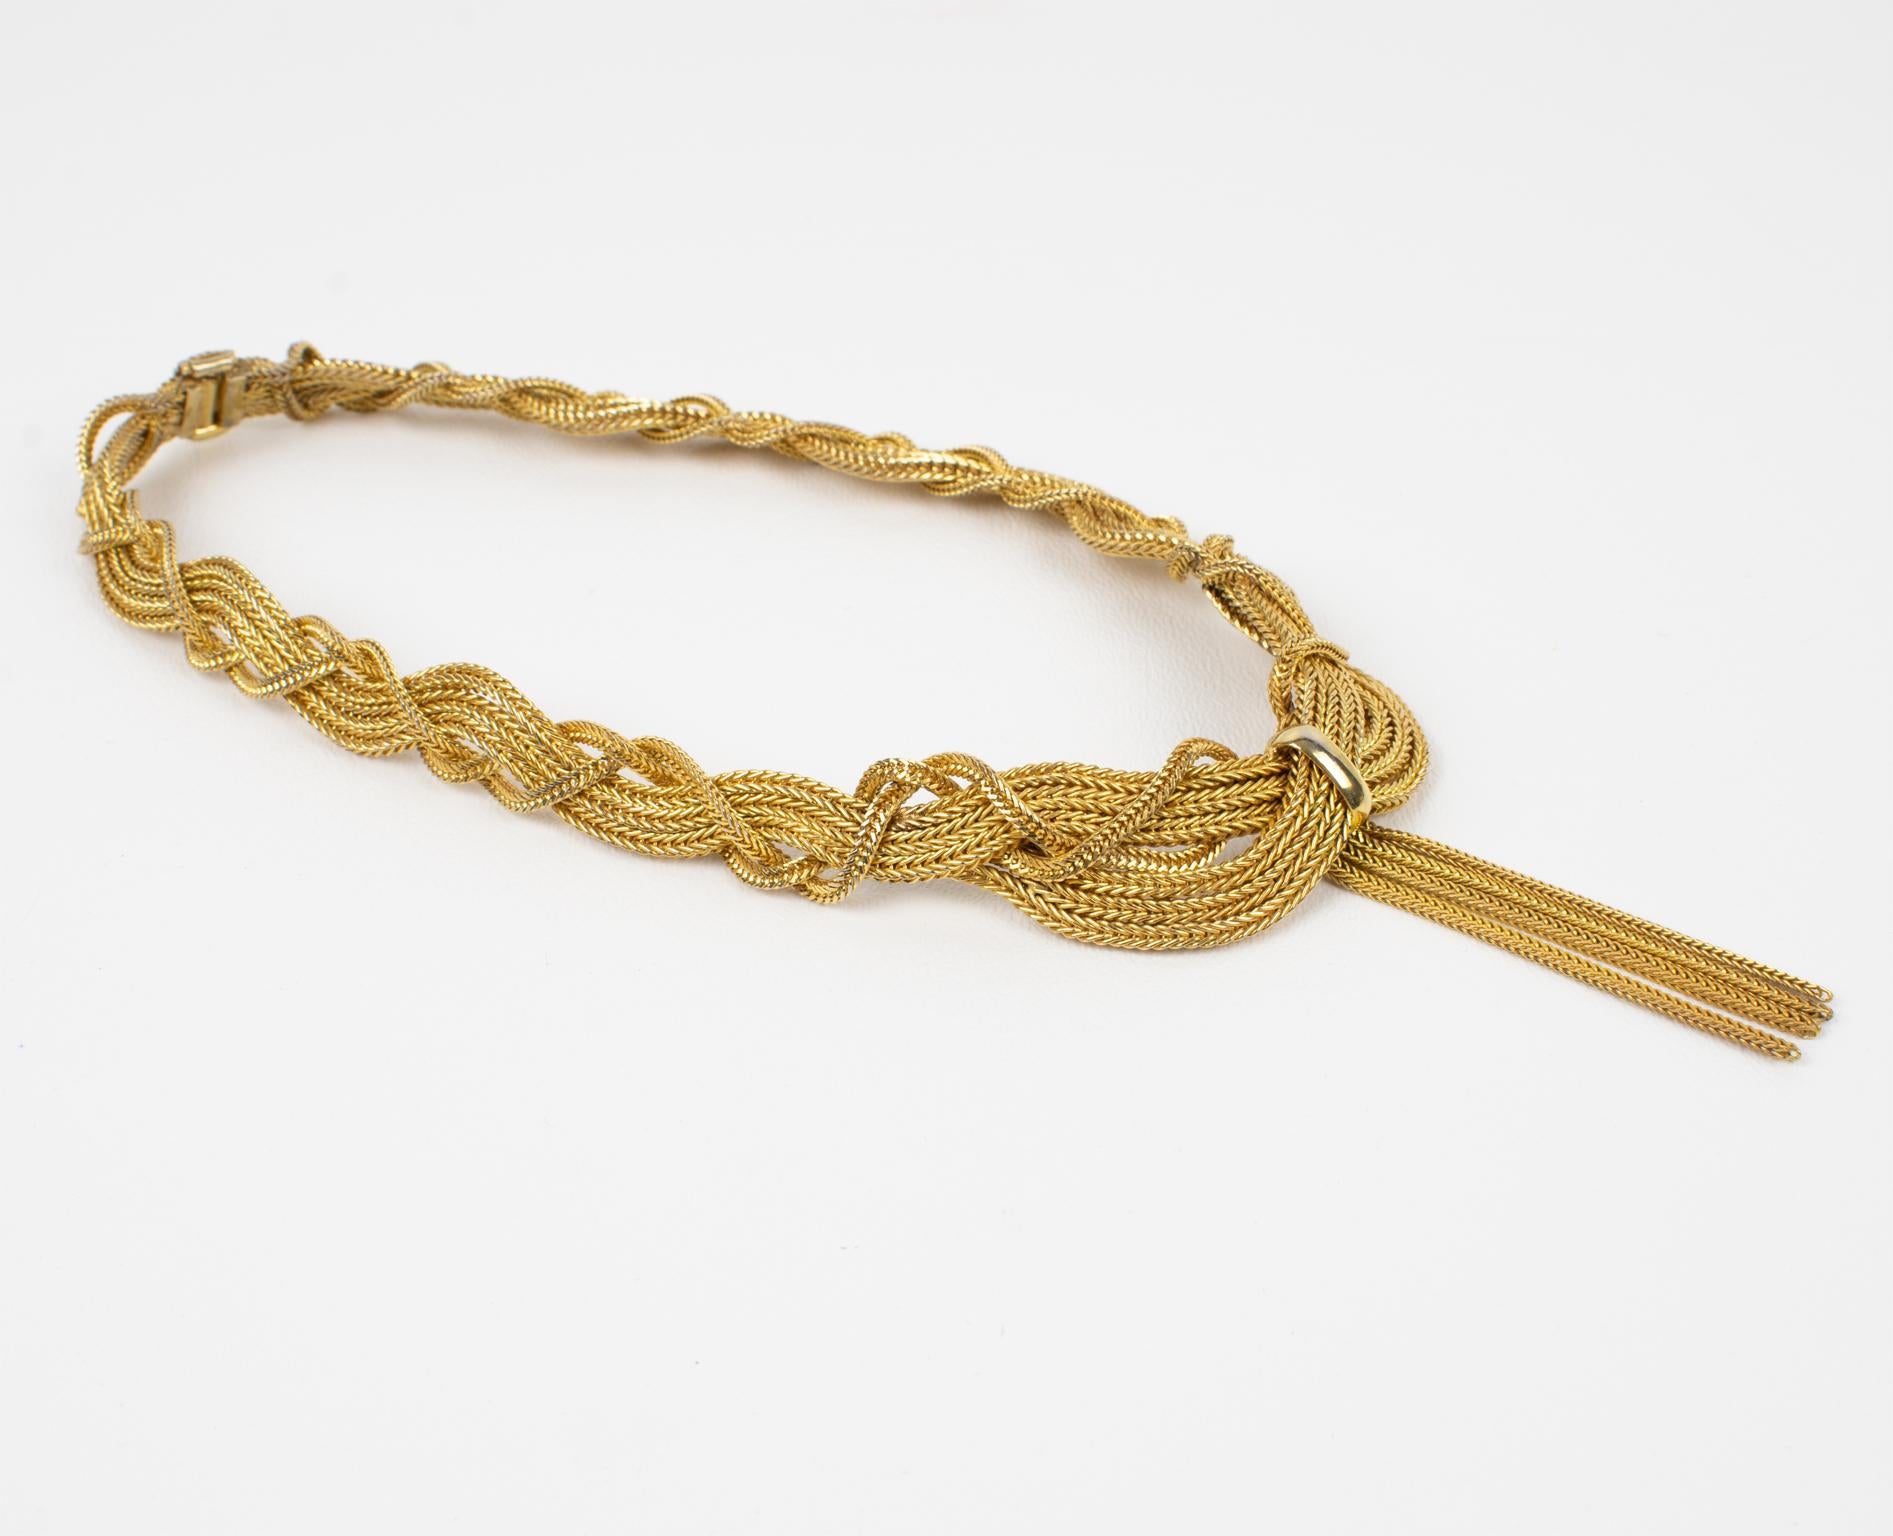 Christian Dior by Grosse 1958 Gilded Metal Braided Choker Necklace In Good Condition For Sale In Atlanta, GA